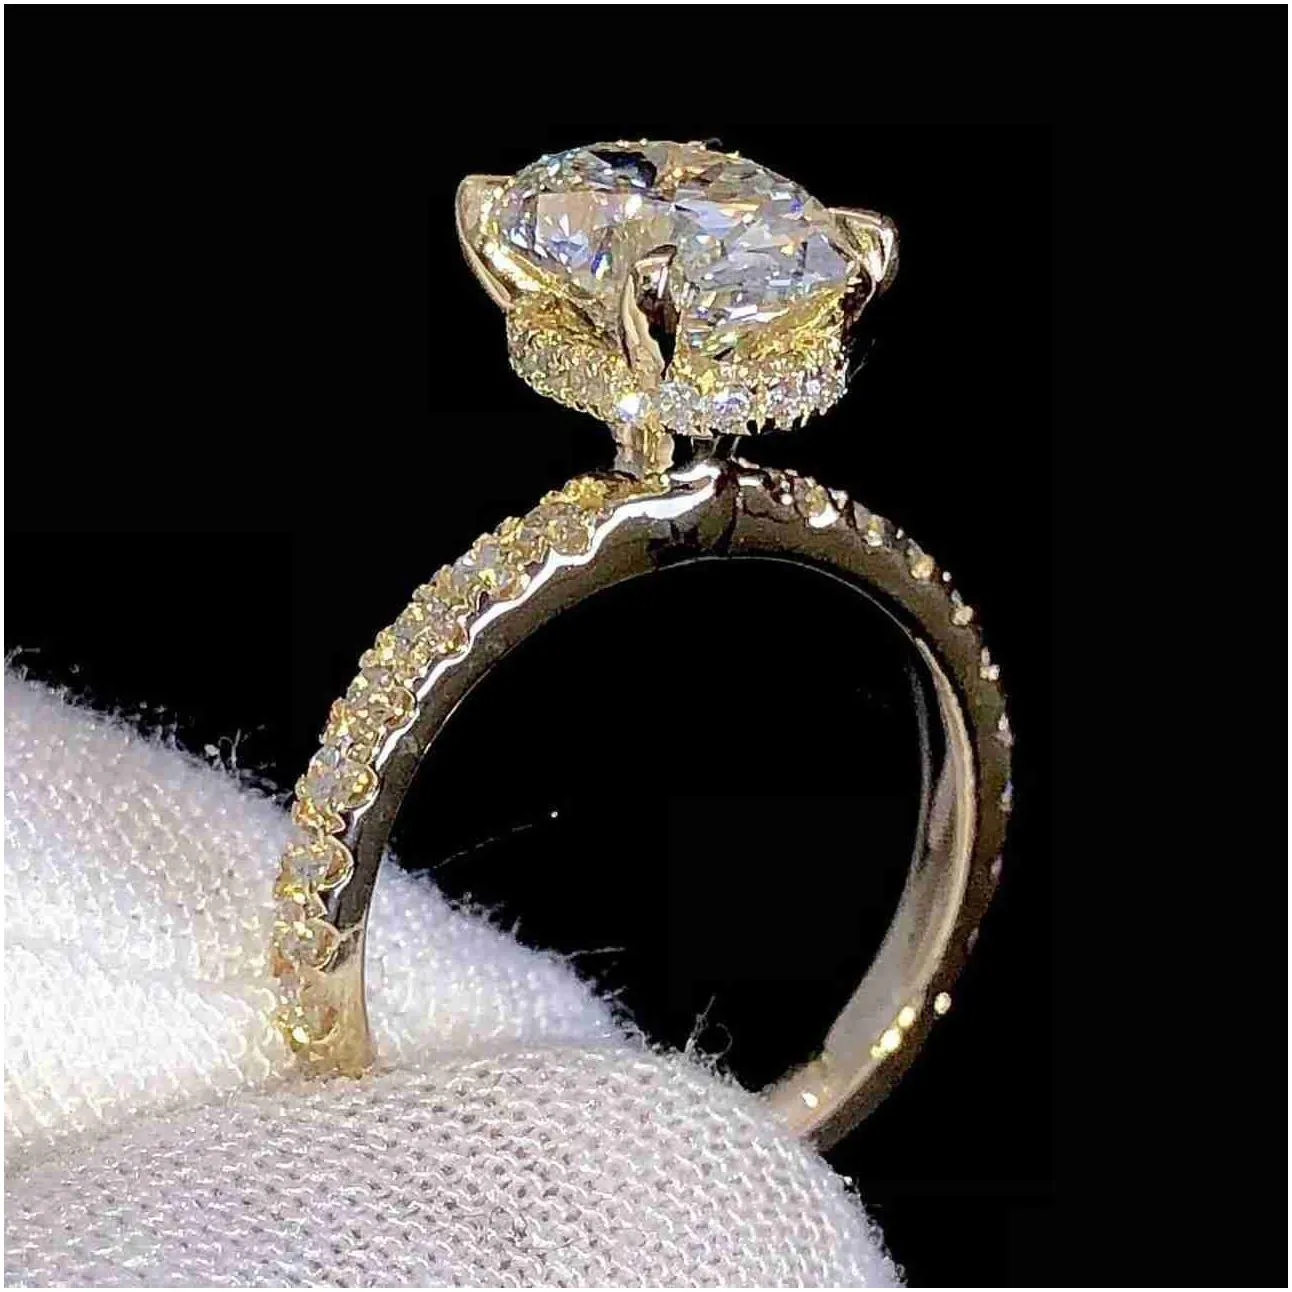 Hot Sale Real Gold 14K 18K S925 Silver Women Engagement Wedding Rings Set Oval Cut Latest Style iamond Engagement Rings Moissanite Jewelry Pearl Gold Accessories